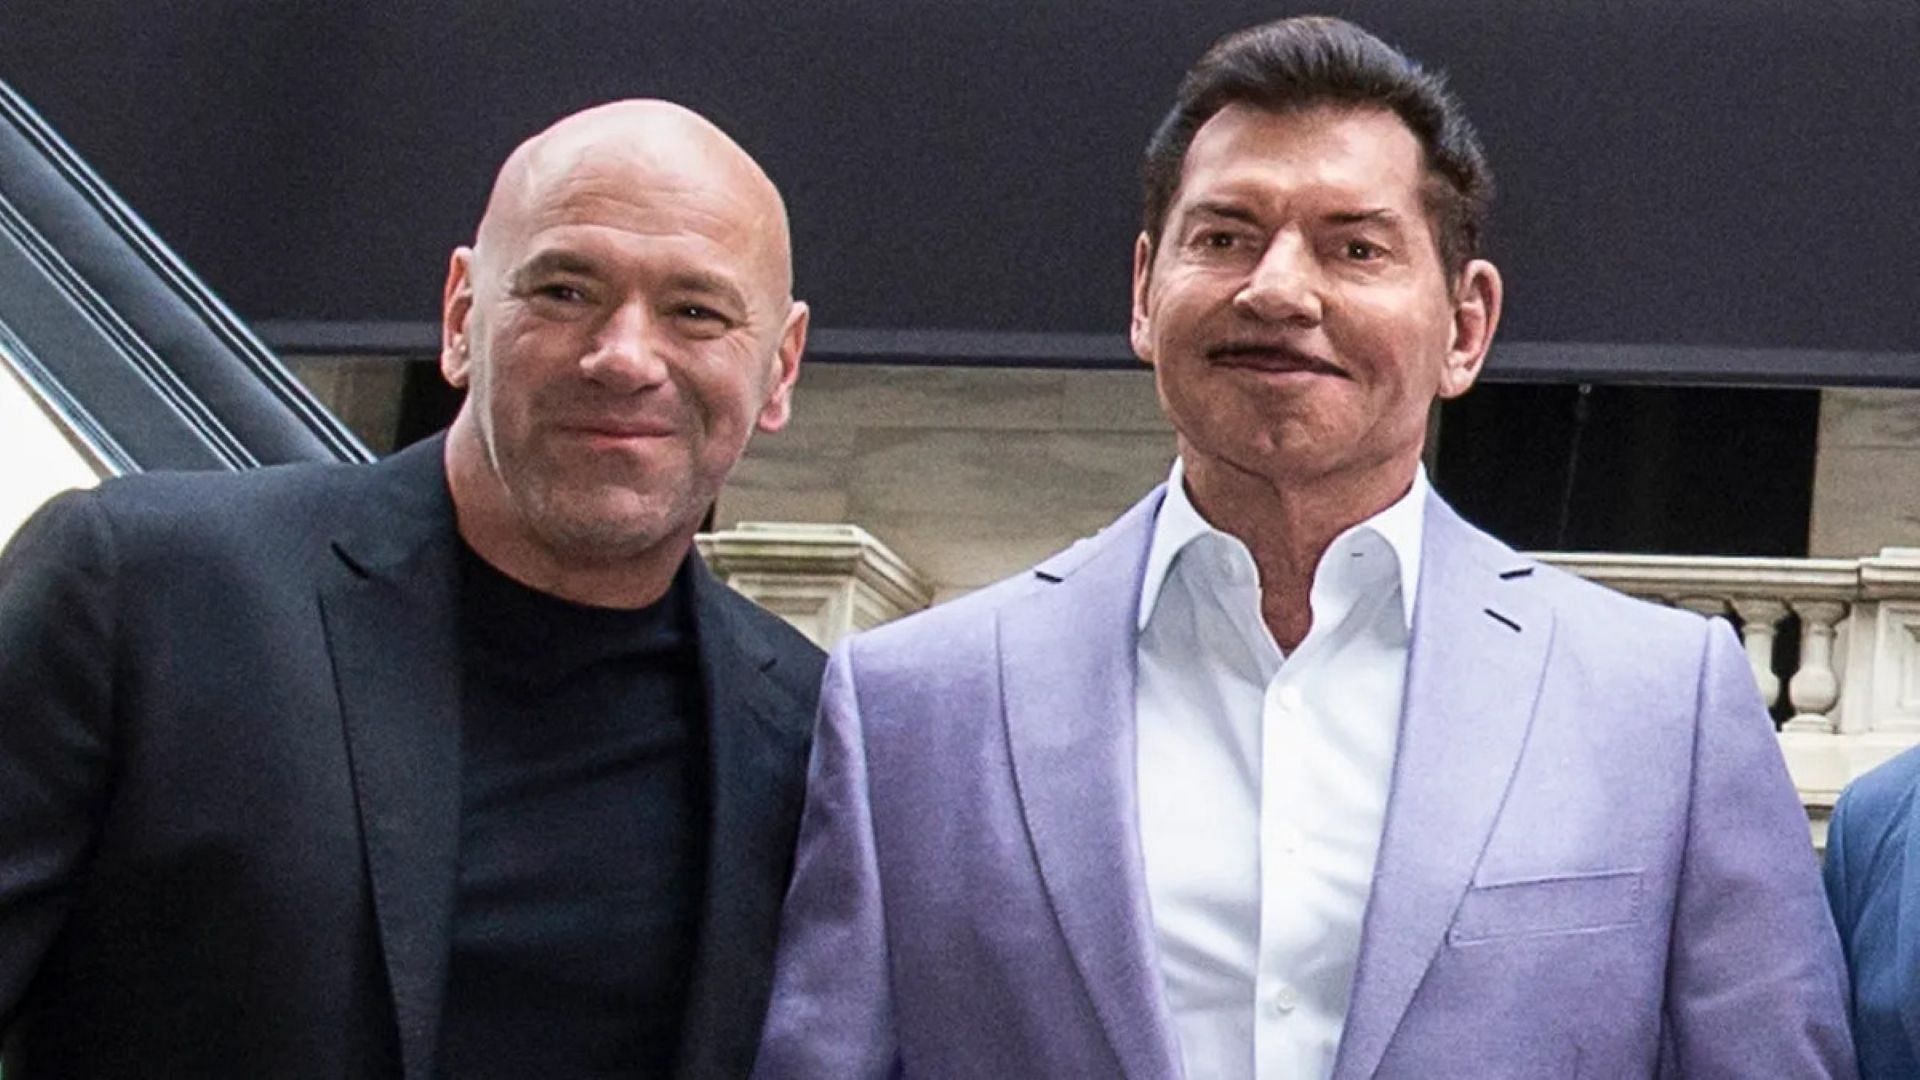 Dana White and Vince McMahon pose together at the NY Stock Exchange